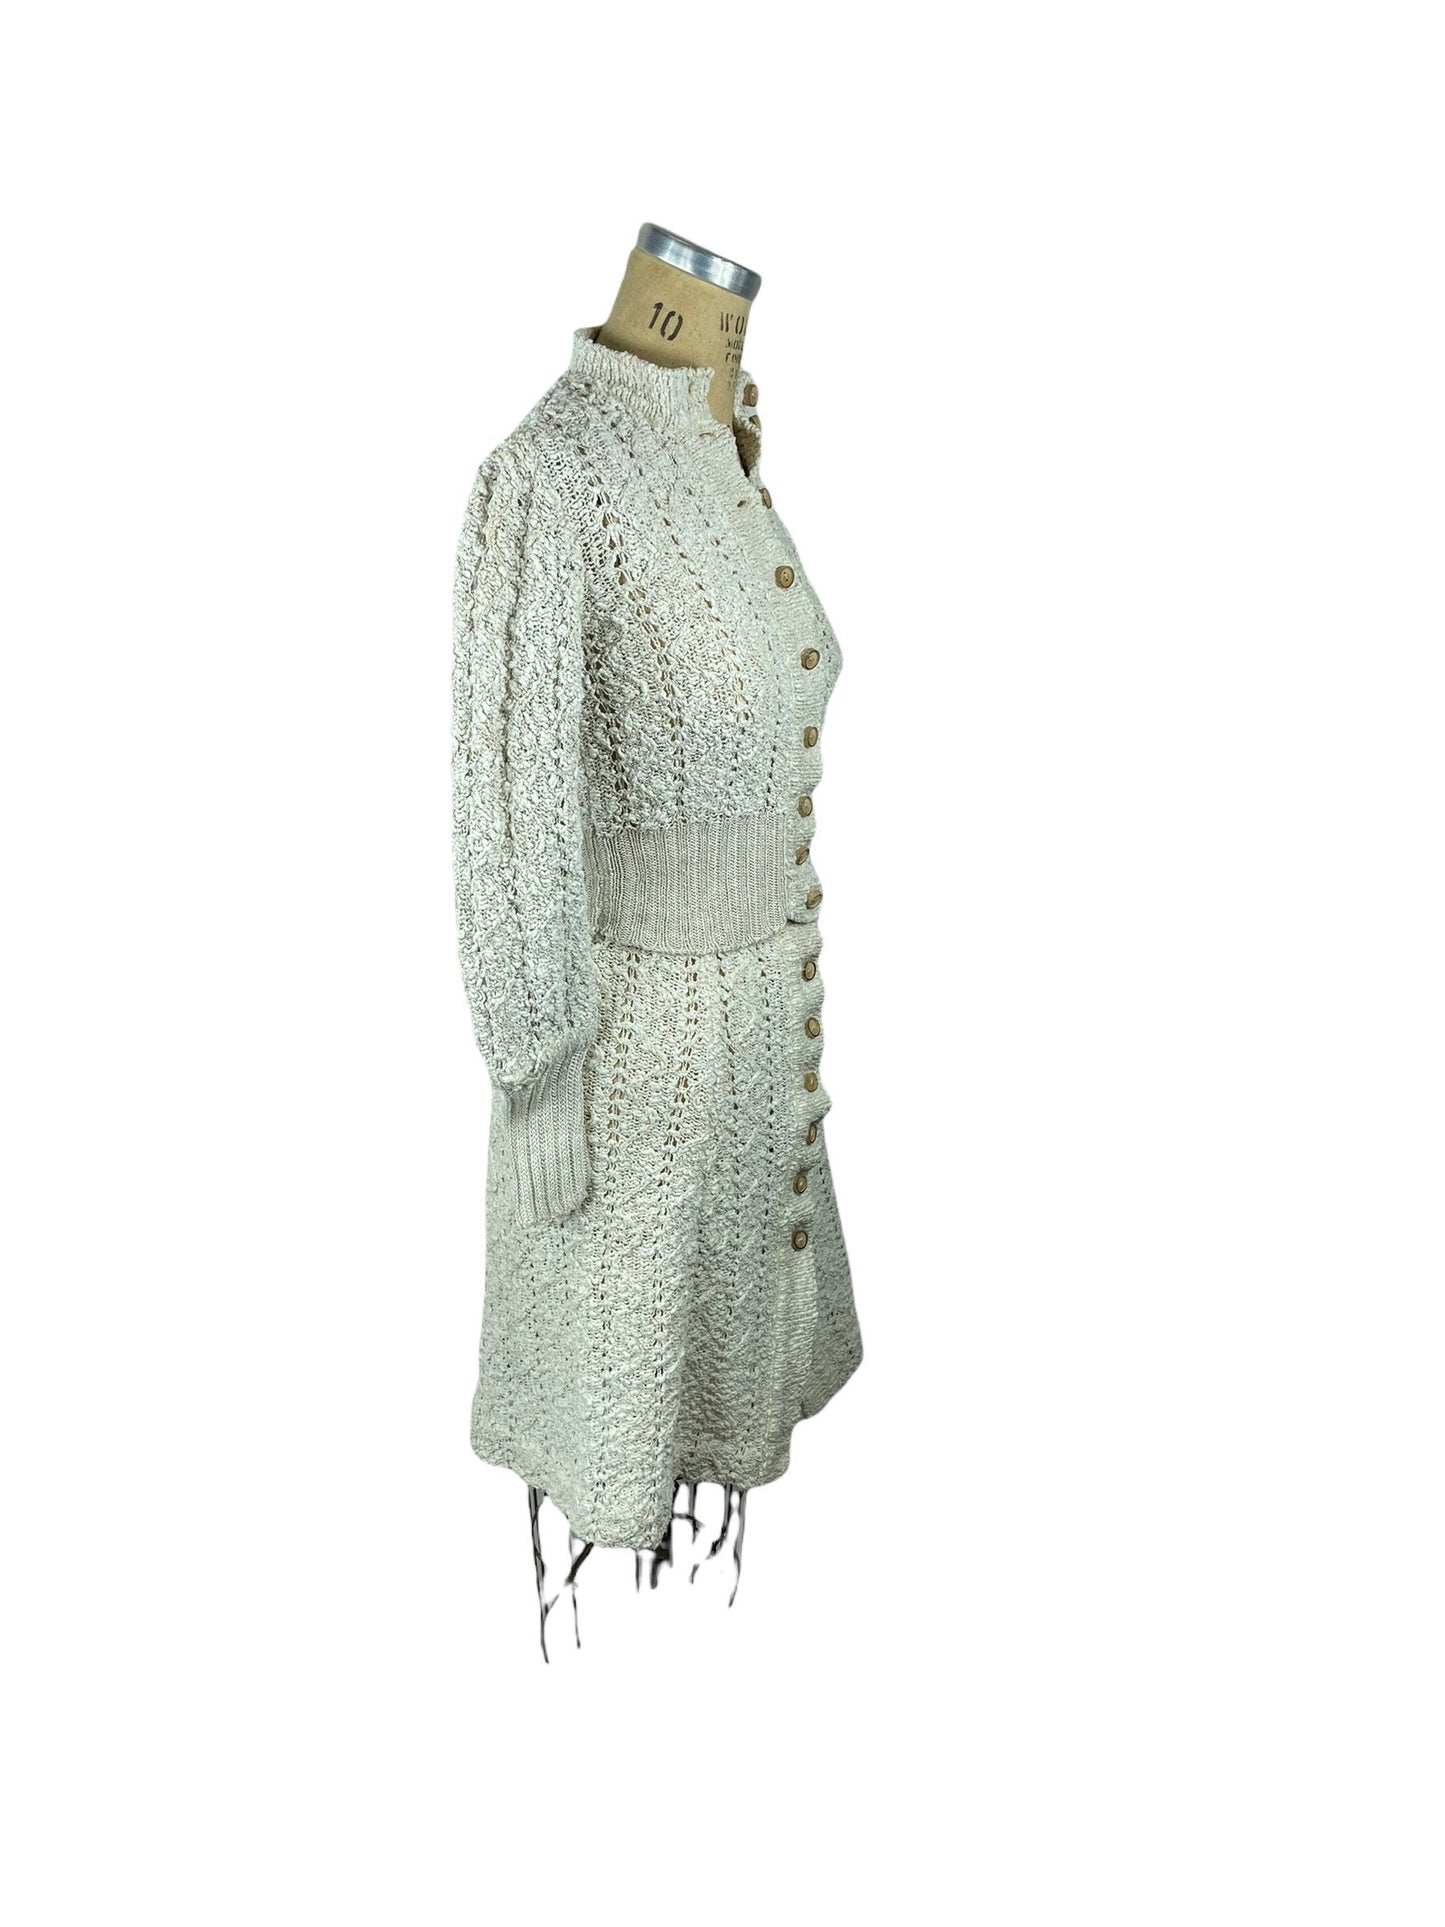 1970s hand loomed cardigan and skirt made in Ireland Size XS/S